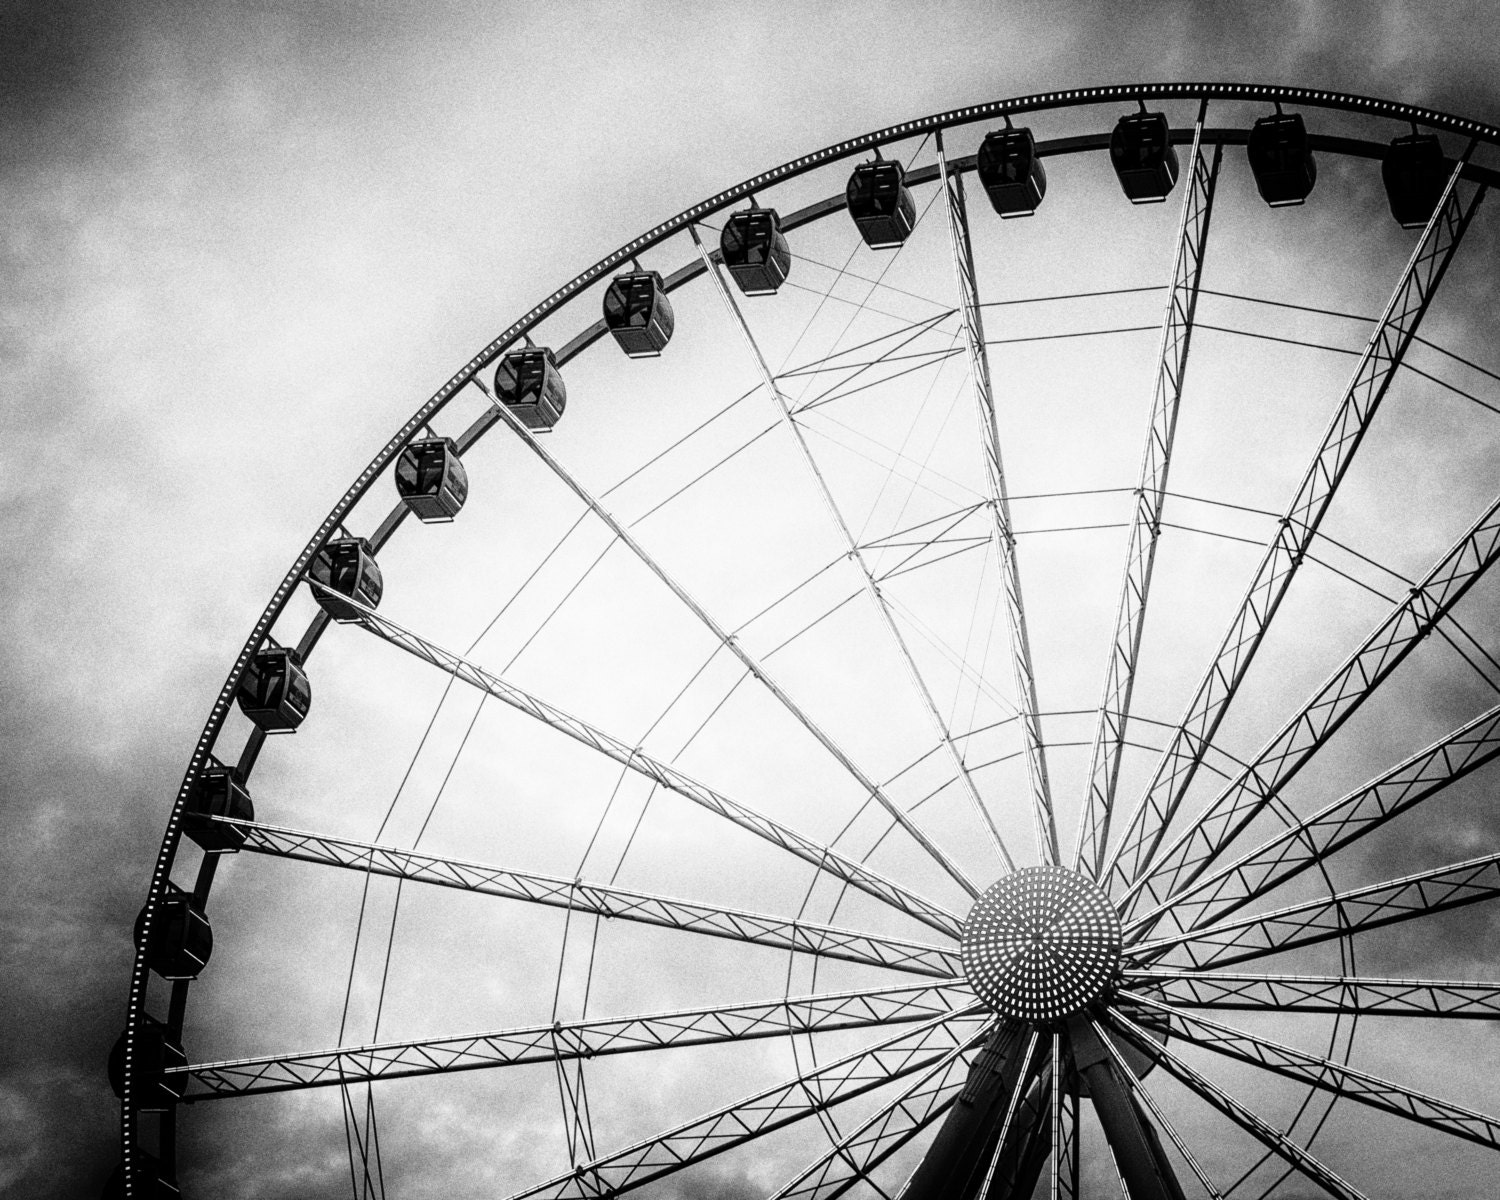 Ferris Wheel on Seattle Waterfront. Travel. Black and White Photography. Monochrome Print by OneFrameStories. - OneFrameStories